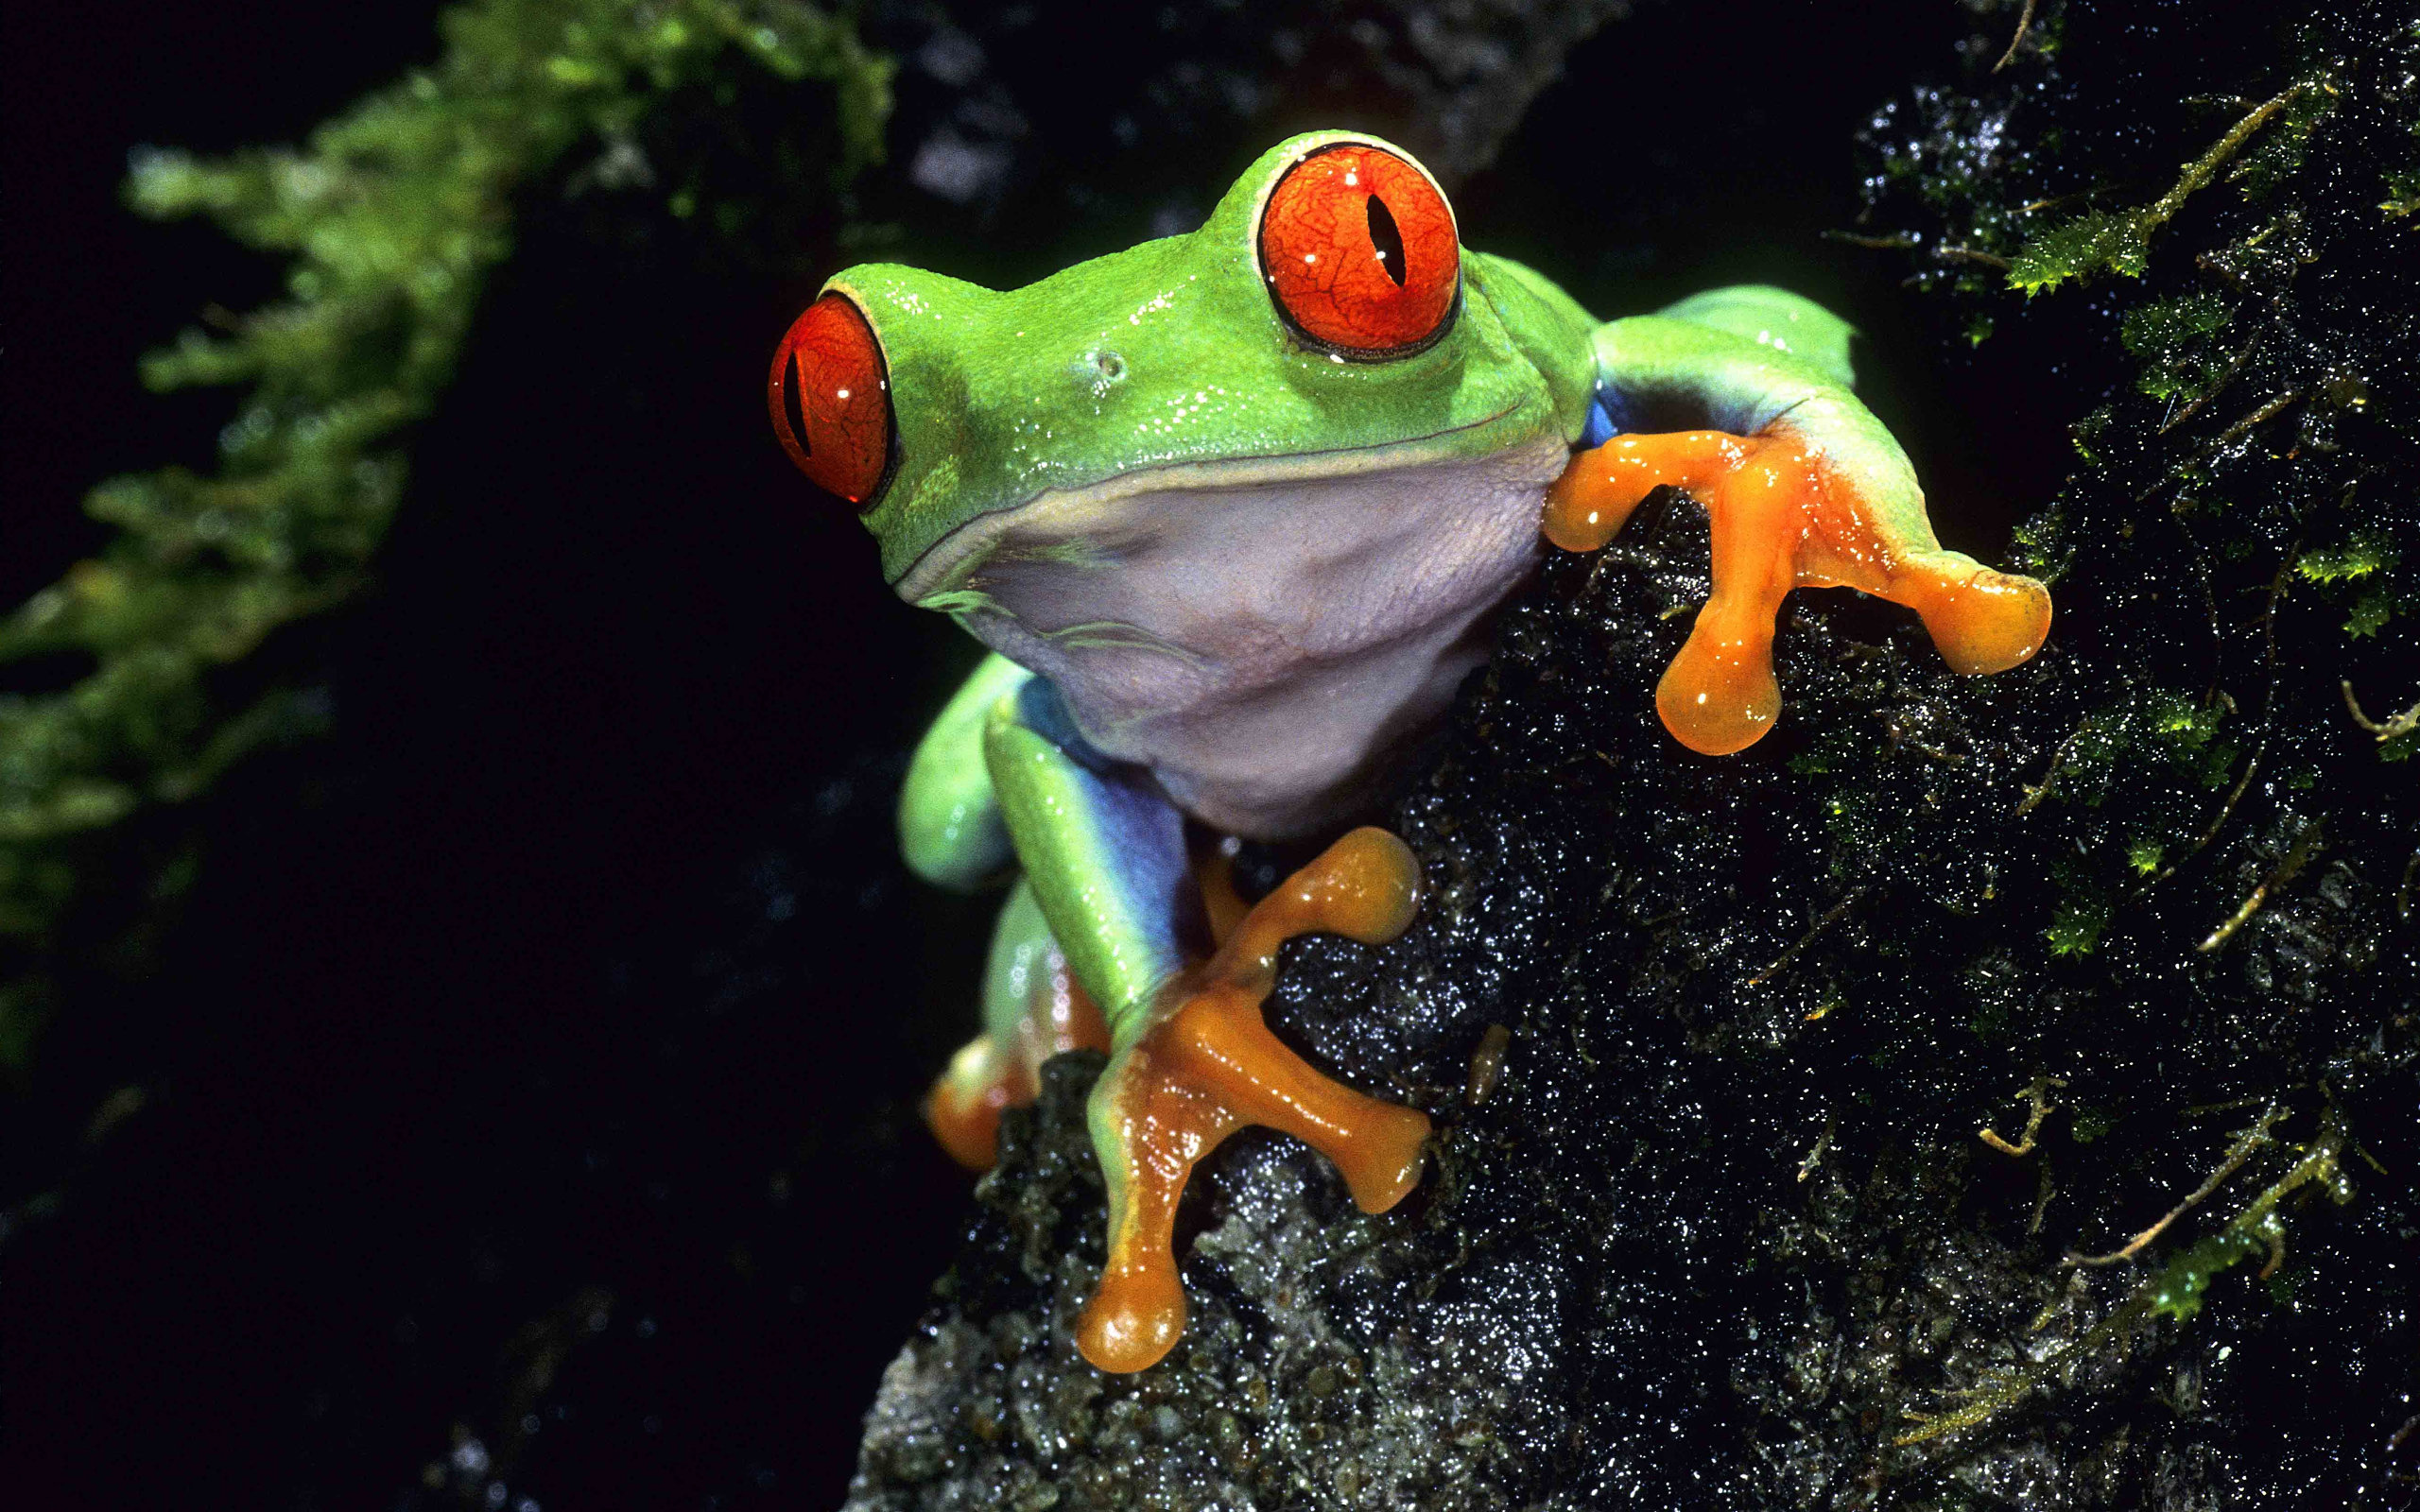 Red-eyed tree frog wallpapers, Detailed textures, Vibrant colours, Desktop and mobile backgrounds, 2560x1600 HD Desktop